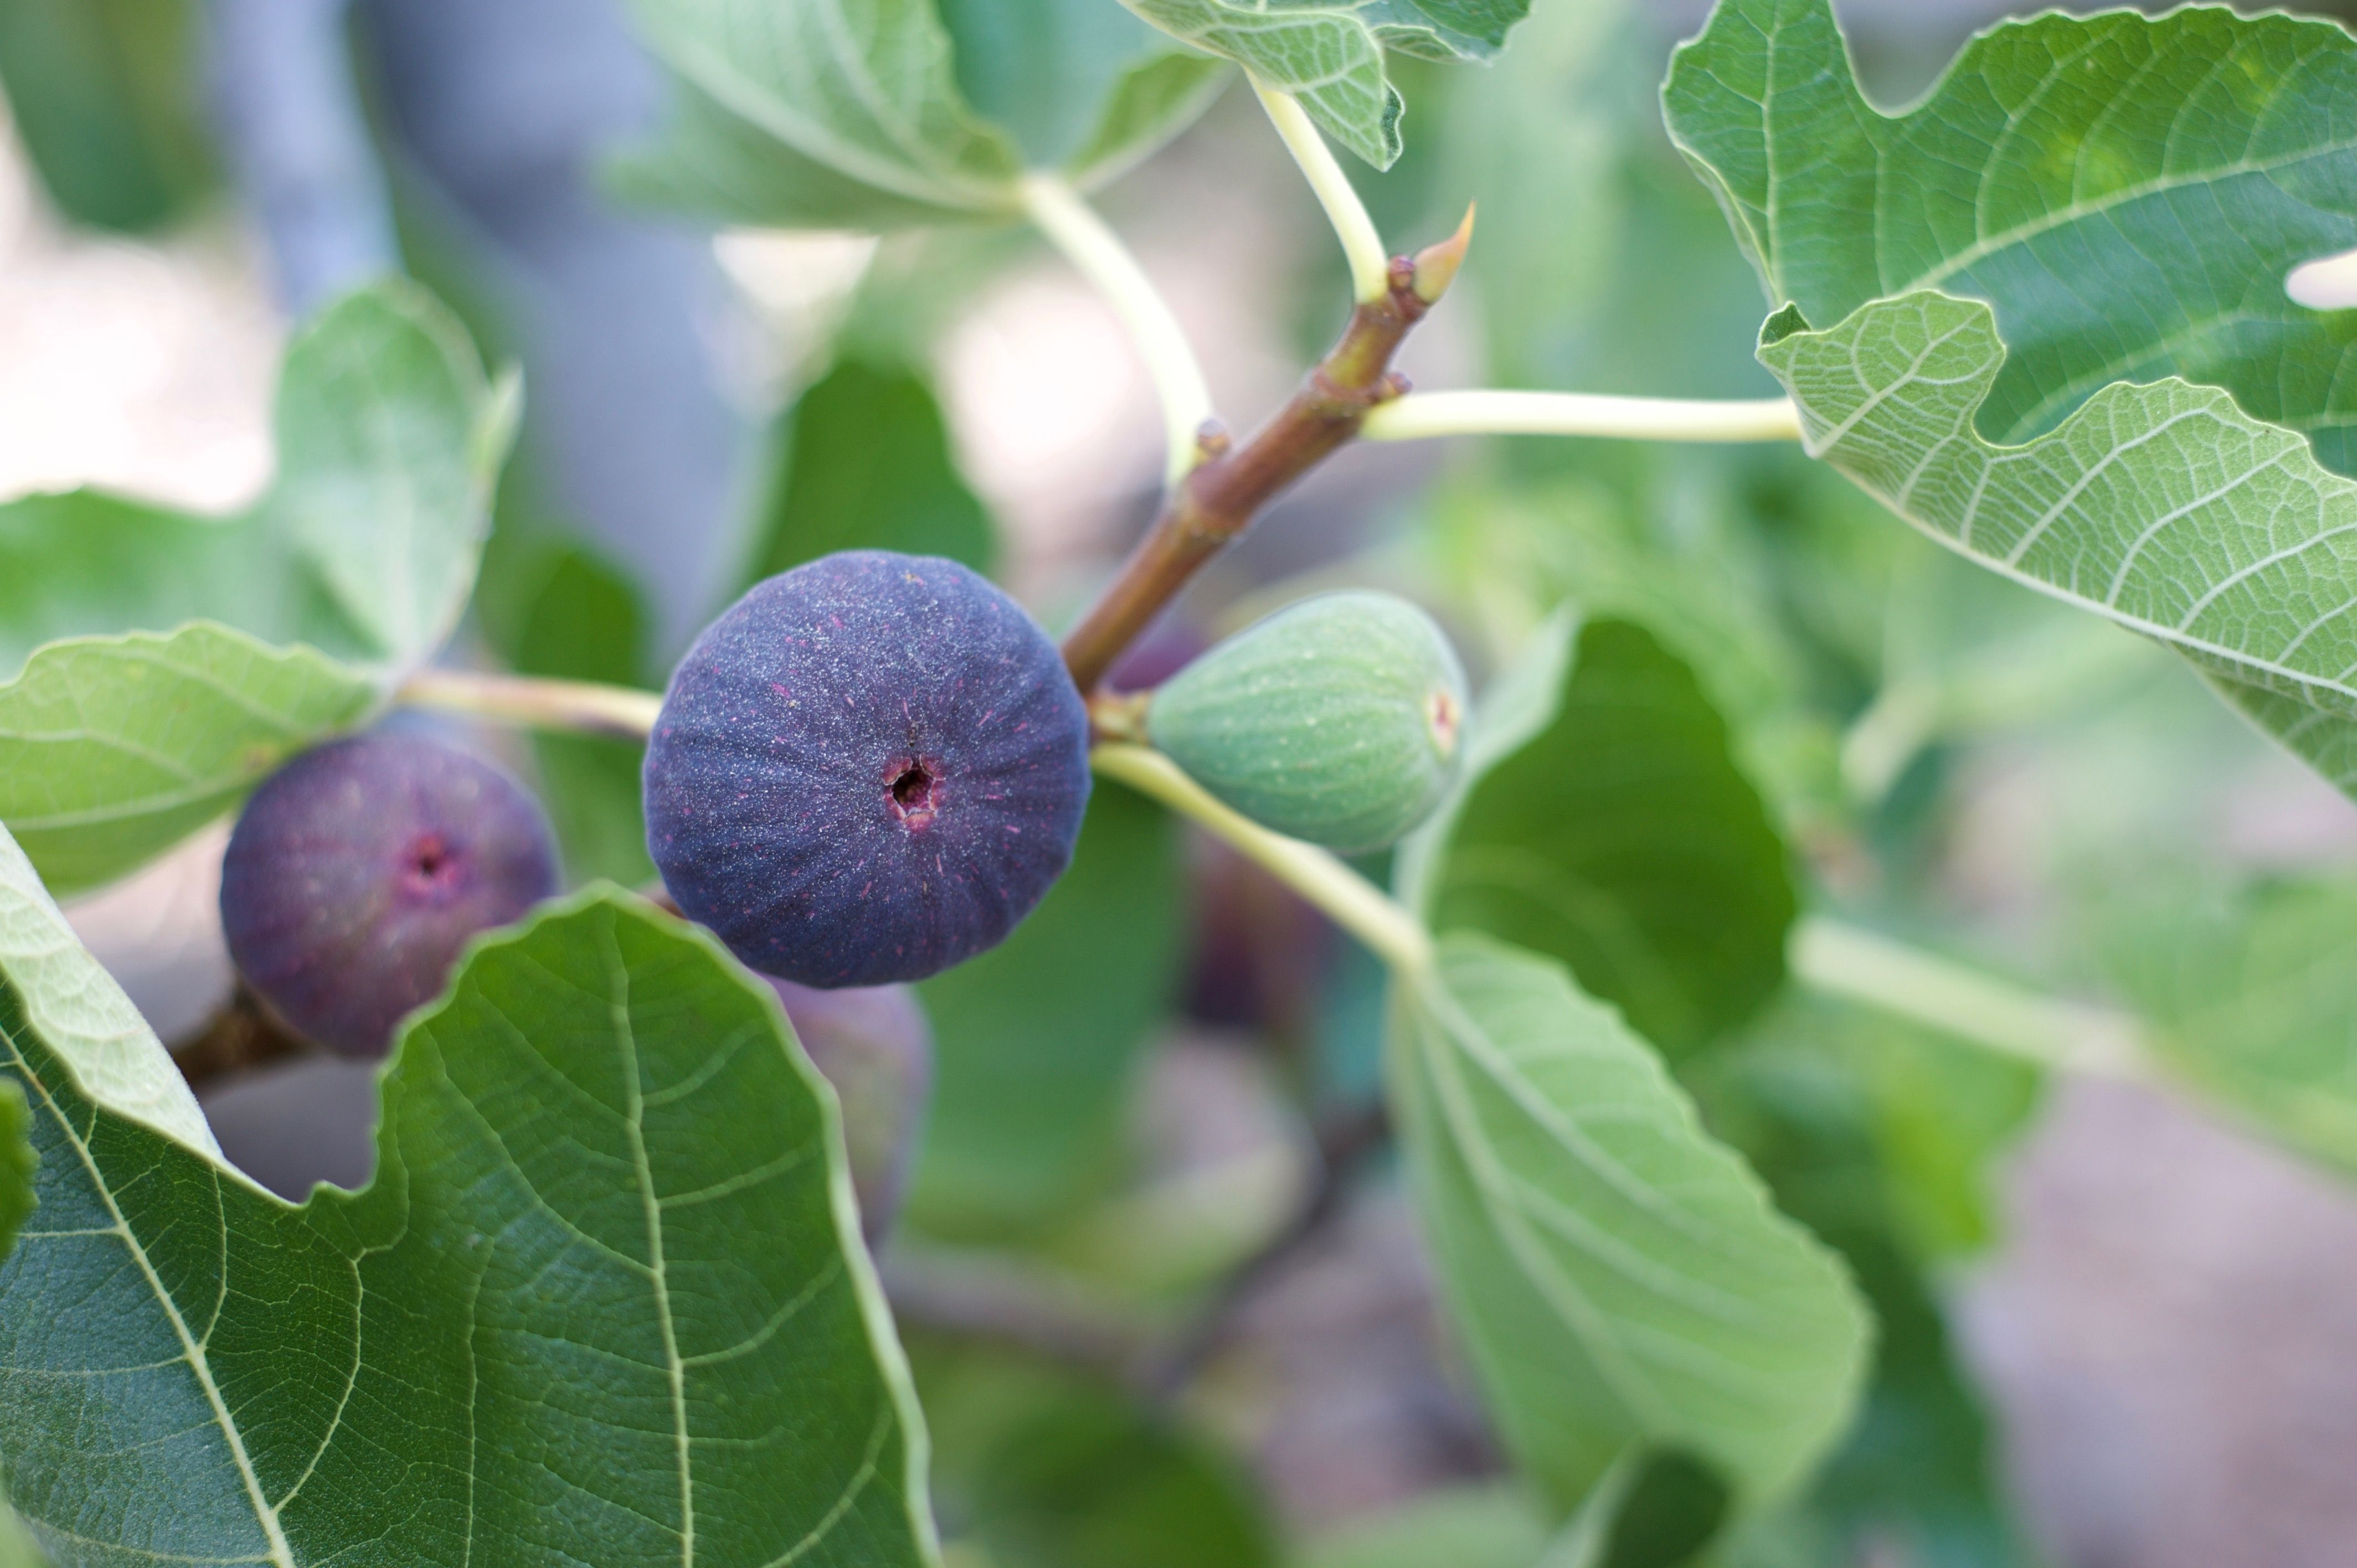 How To Grow Figs Planting And Caring For Fig Trees,Ikea Lack Bookshelf Hack